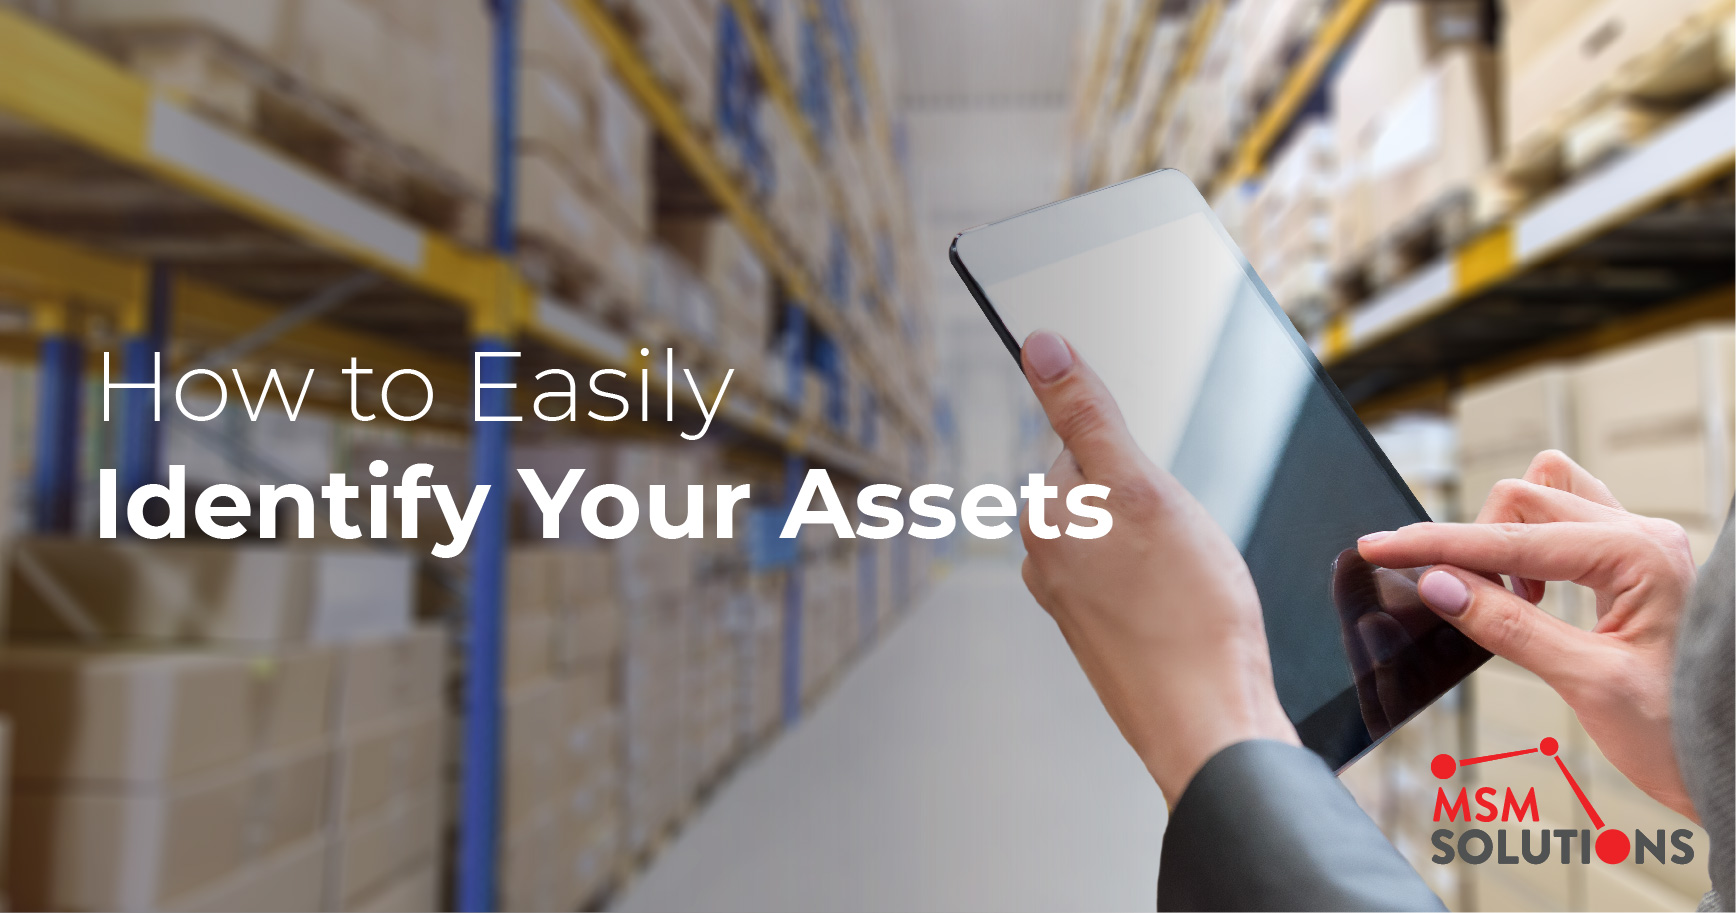 How to Easily Identify Your Assets | MSM Solutions